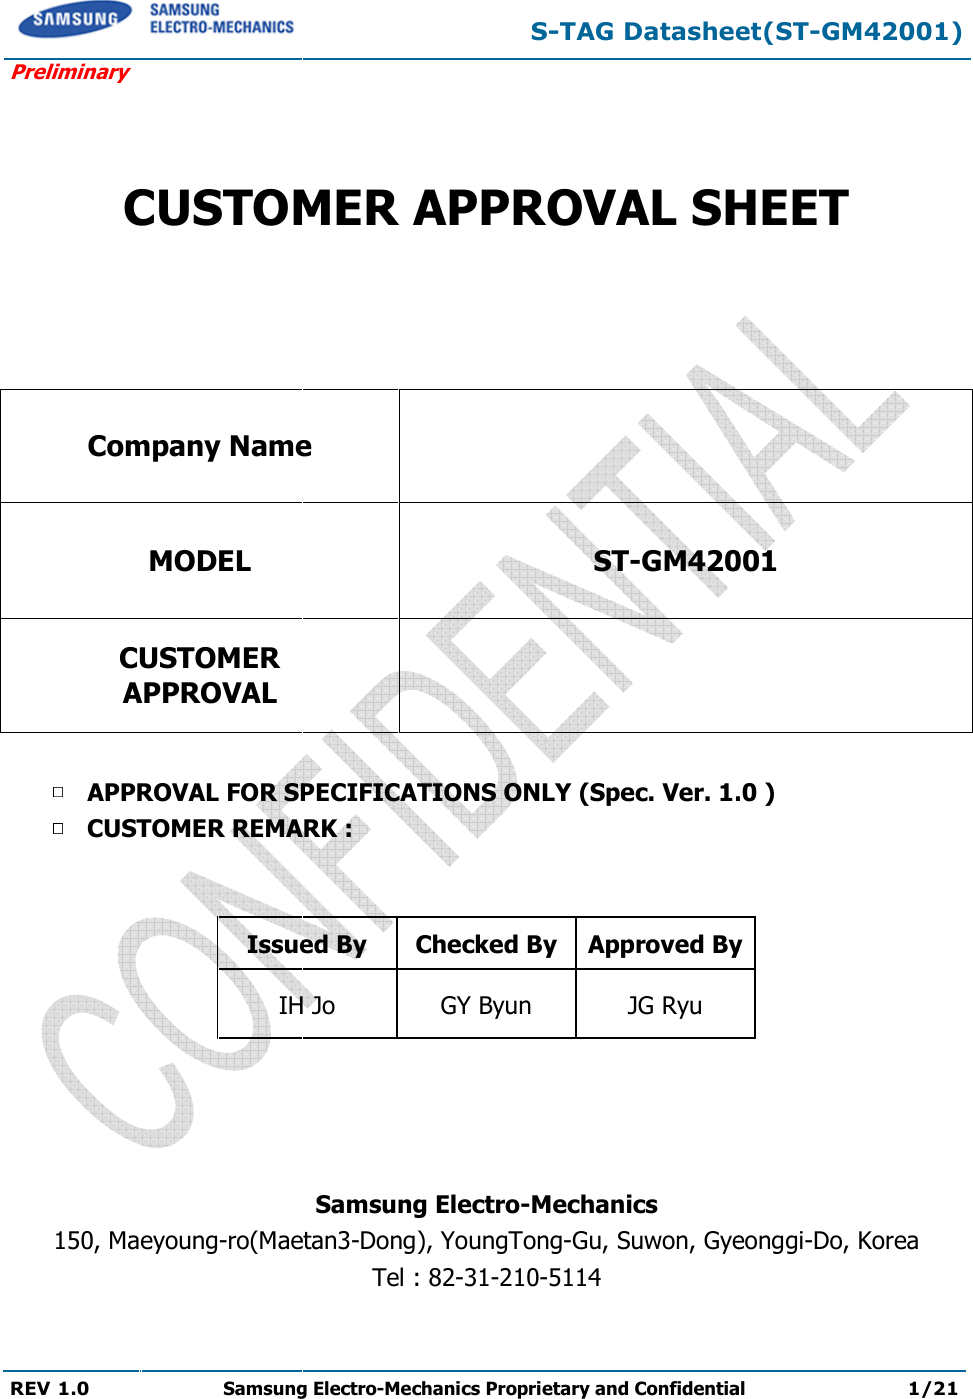  Preliminary REV 1.0 Samsung Electro  CUSTOMER APPROVAL SHEETCompany NameMODEL CUSTOMER APPROVAL APPROVAL FOR SPECIFICATIONS ONLY (Spec. Ver. CUSTOMER REMARK :   Issued ByIH Jo    150, Maeyoung-ro(Maetan S-TAG Datasheet(STSamsung Electro-Mechanics Proprietary and Confidential  CUSTOMER APPROVAL SHEET  Company Name  ST-GM4200  APPROVAL FOR SPECIFICATIONS ONLY (Spec. Ver. 1.0CUSTOMER REMARK : Issued By  Checked By Approved ByIH Jo  GY Byun  JG Ryu Samsung Electro-Mechanics Maetan3-Dong), YoungTong-Gu, Suwon, GyeonTel : 82-31-210-5114 TAG Datasheet(ST-GM42001) Proprietary and Confidential 1/21 CUSTOMER APPROVAL SHEET 001 1.0 ) Approved By eonggi-Do, Korea  